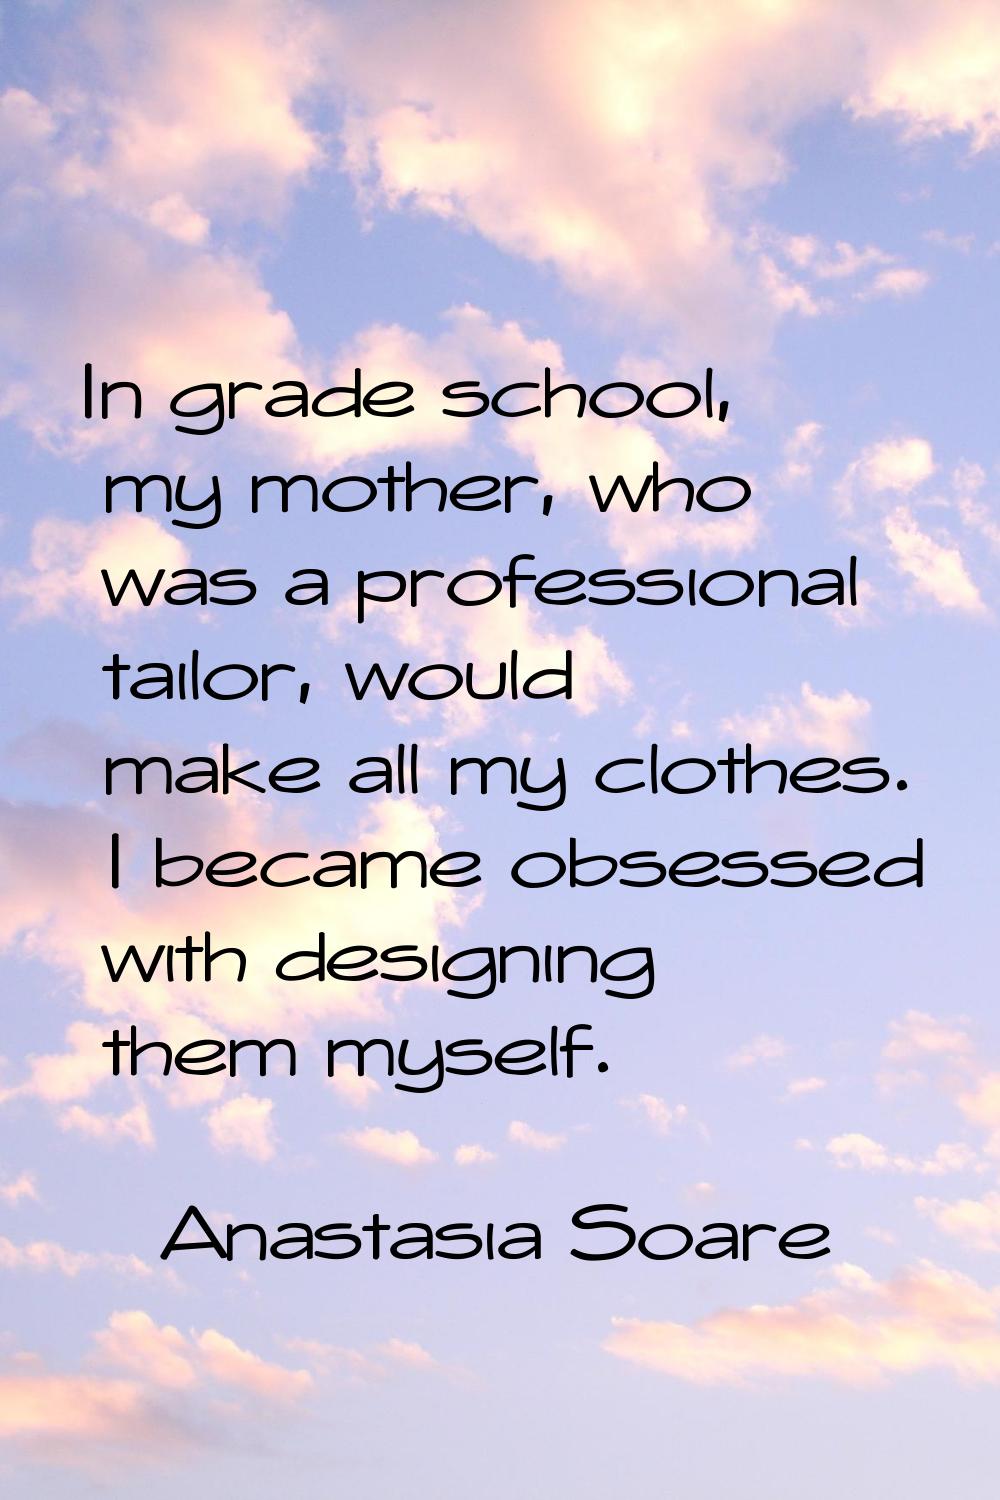 In grade school, my mother, who was a professional tailor, would make all my clothes. I became obse